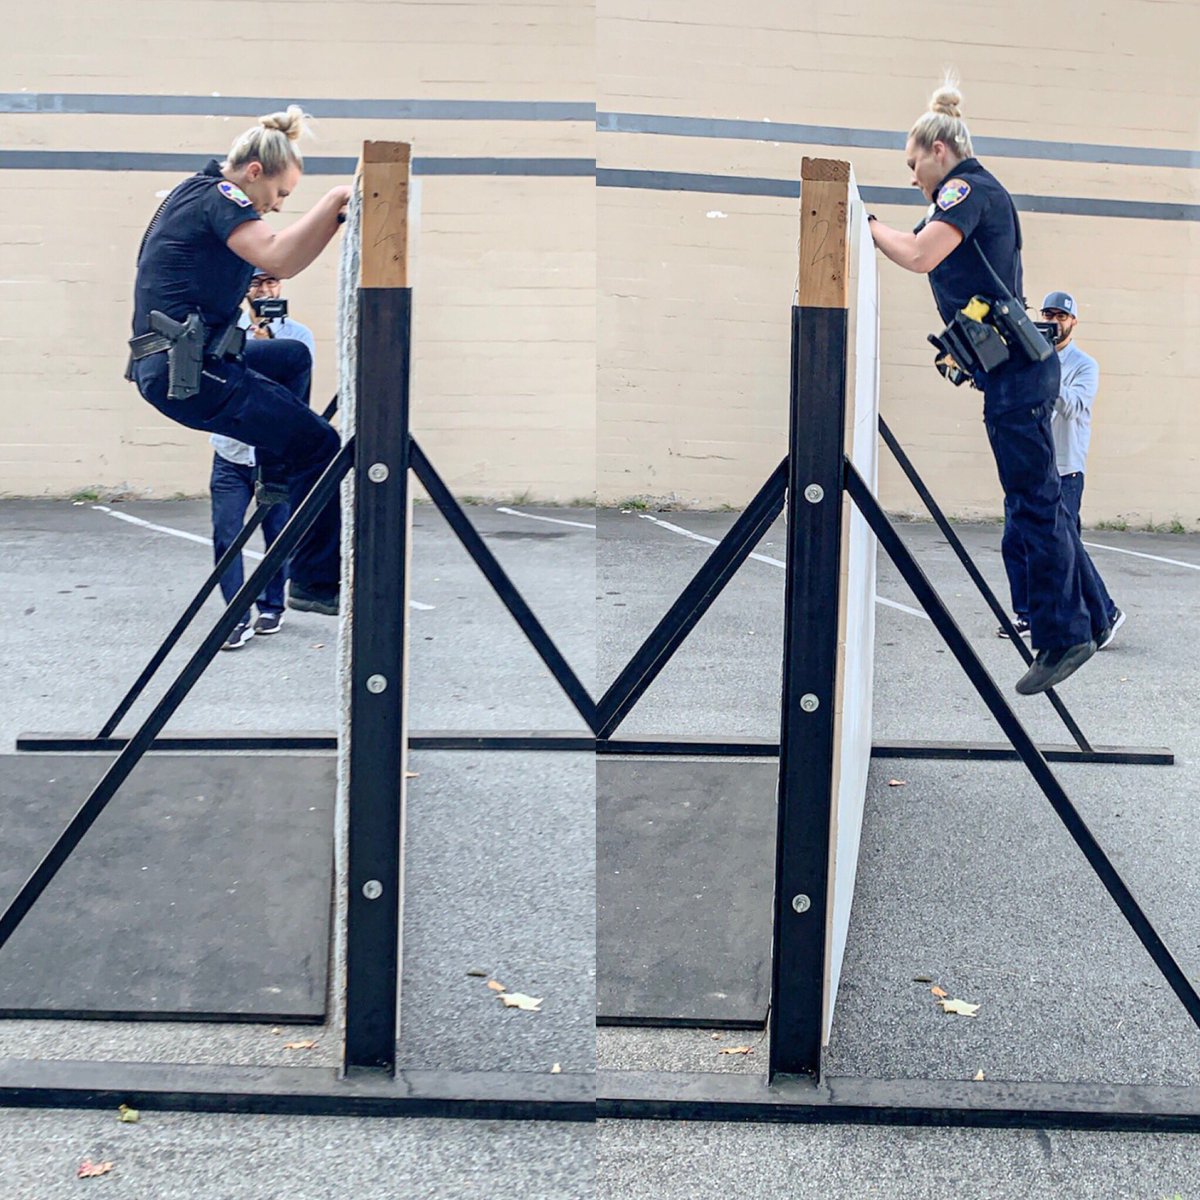 One of the best things officers can do for themselves is always keep training!! Made it over the 6ft wall in full gear, after working a full shift 😴 #crossfitwithacop #salinaspd #fitcops @SalinasPD @LivePDNation